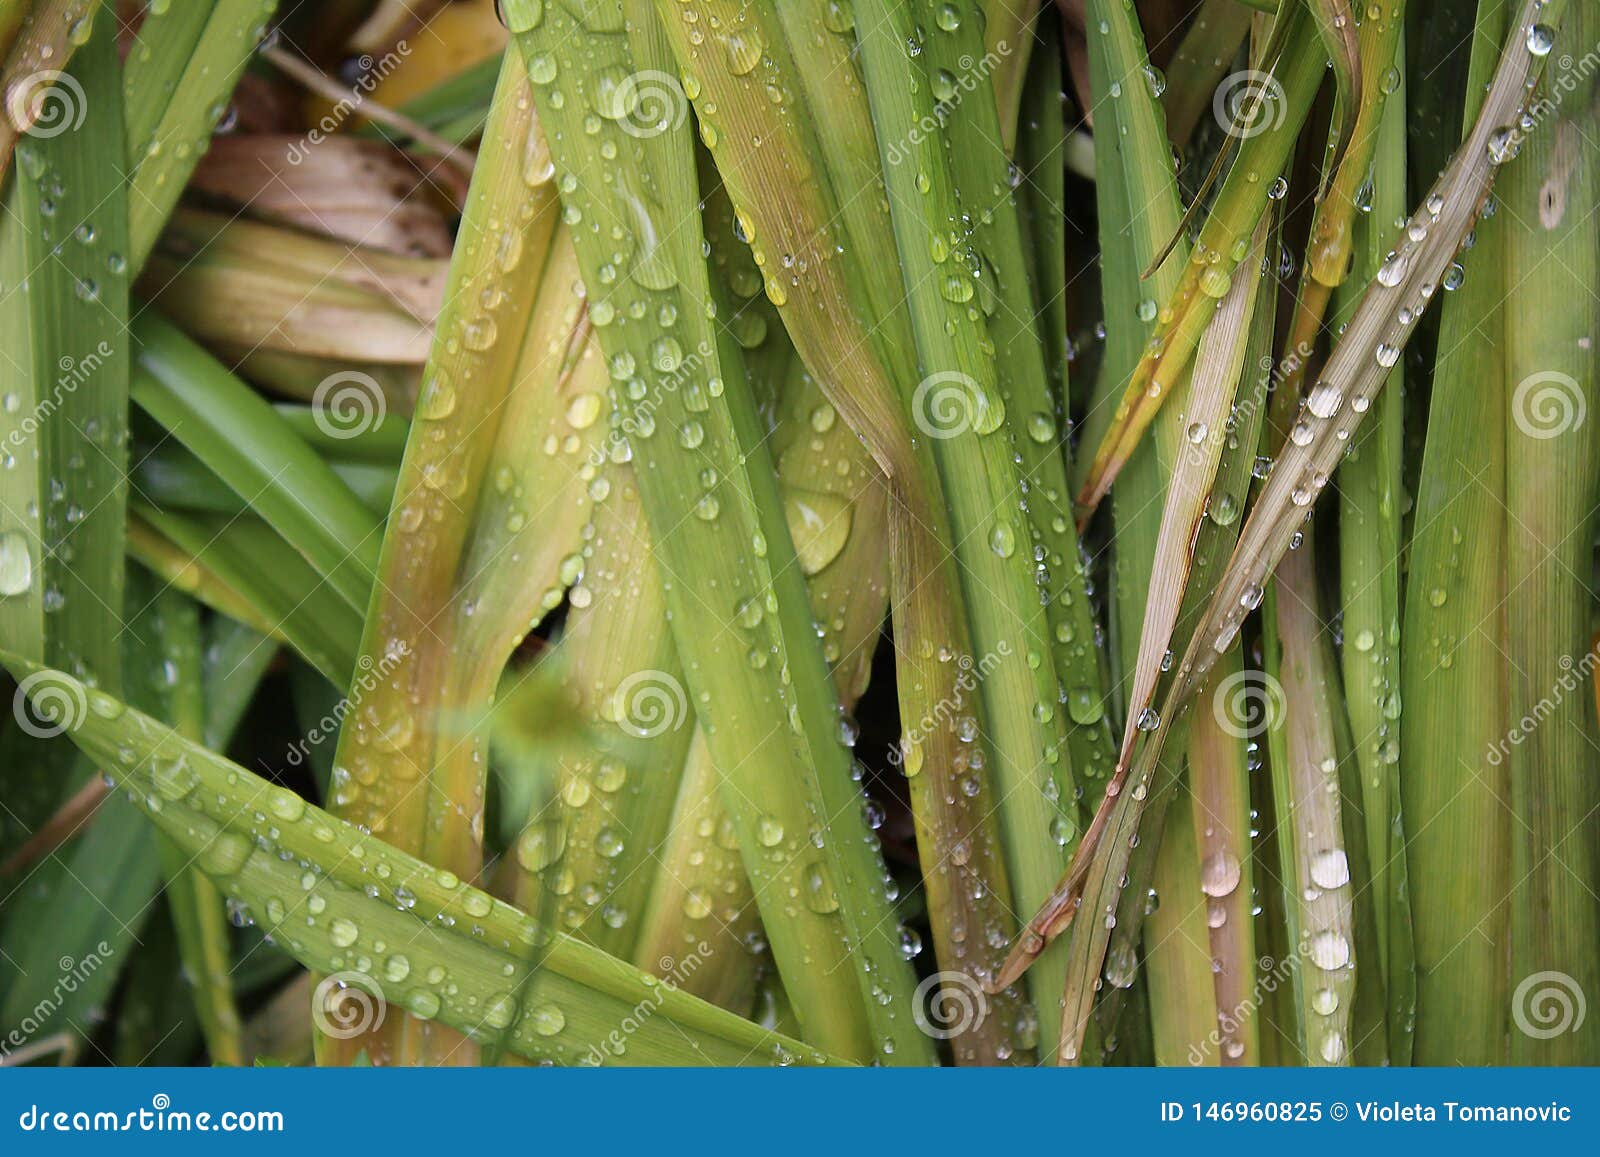 drops, droplets of rain, water on the leaves of wild crin